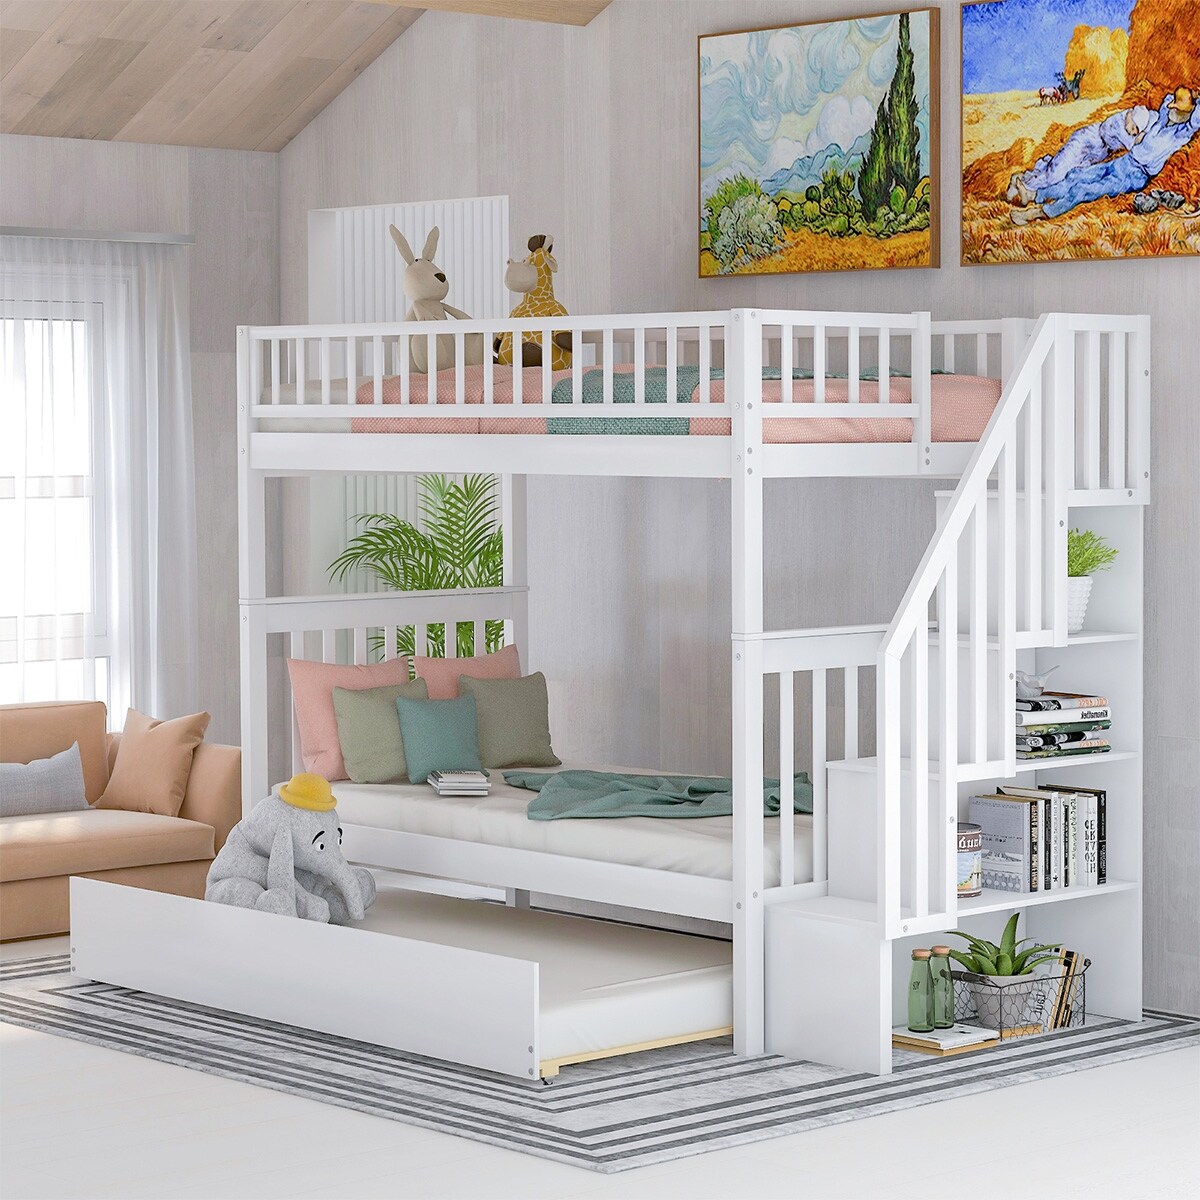 bunk beds with shelves and storage